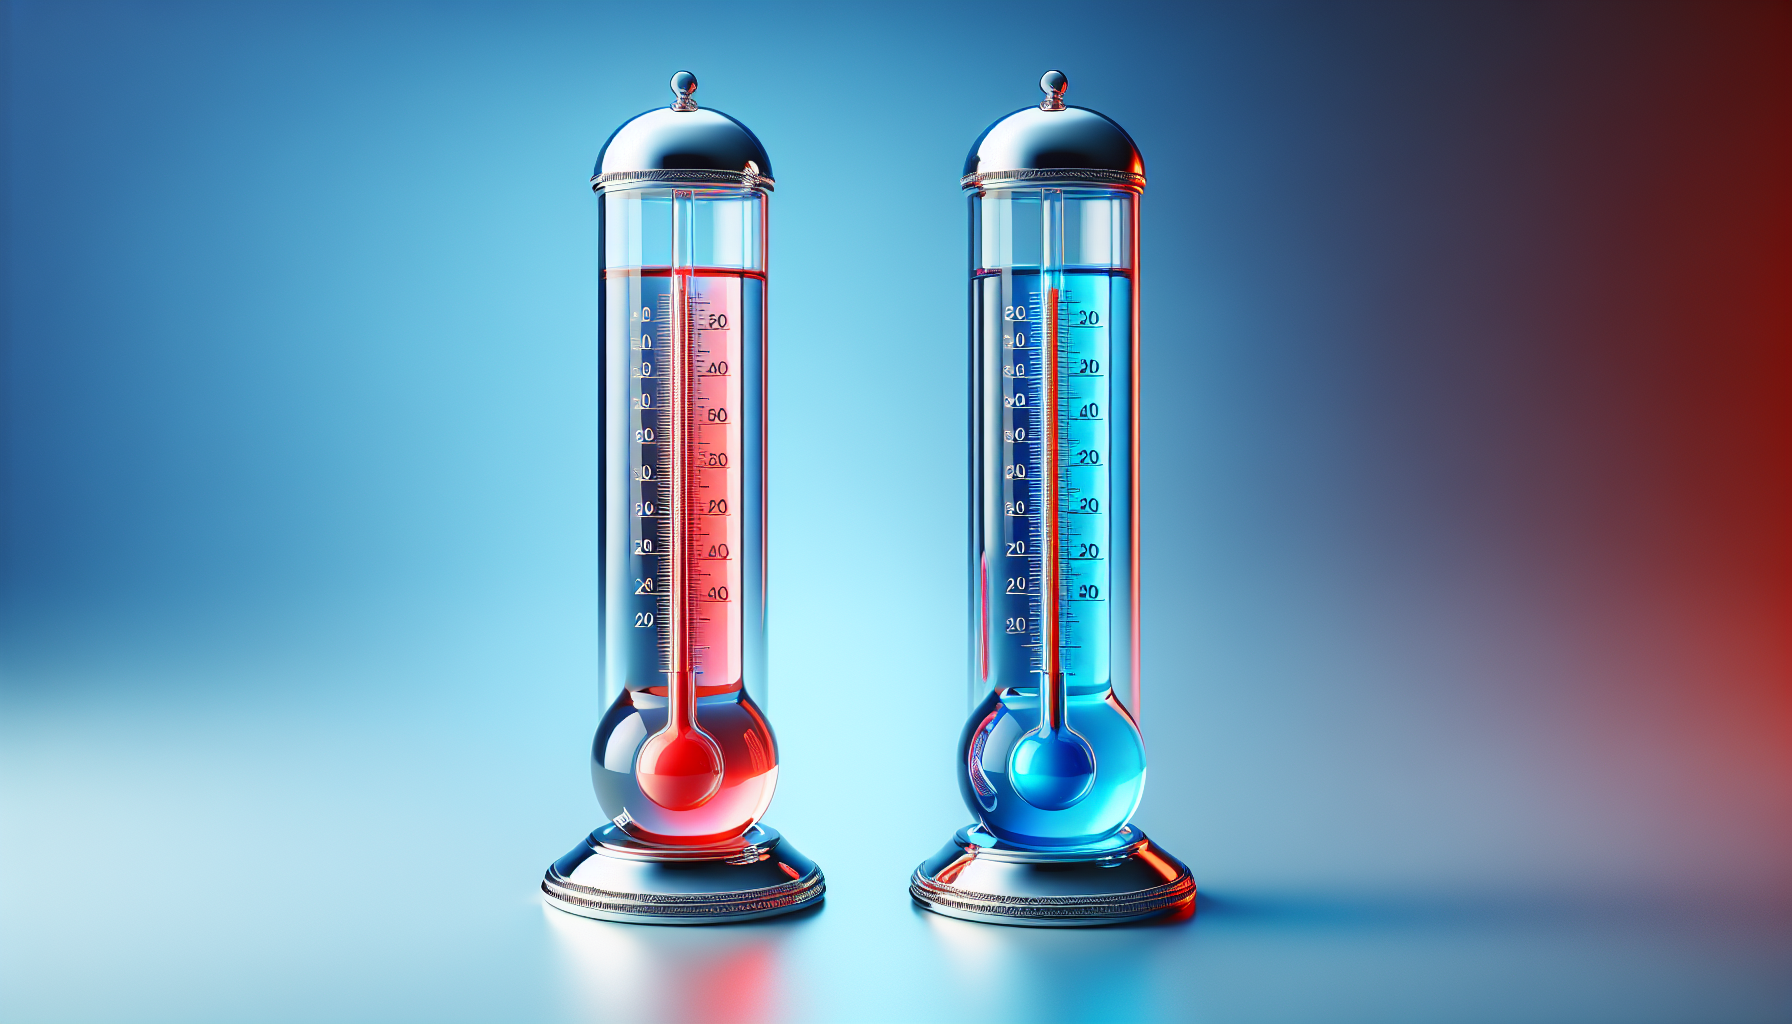 Illustration of Celsius and Fahrenheit thermometers